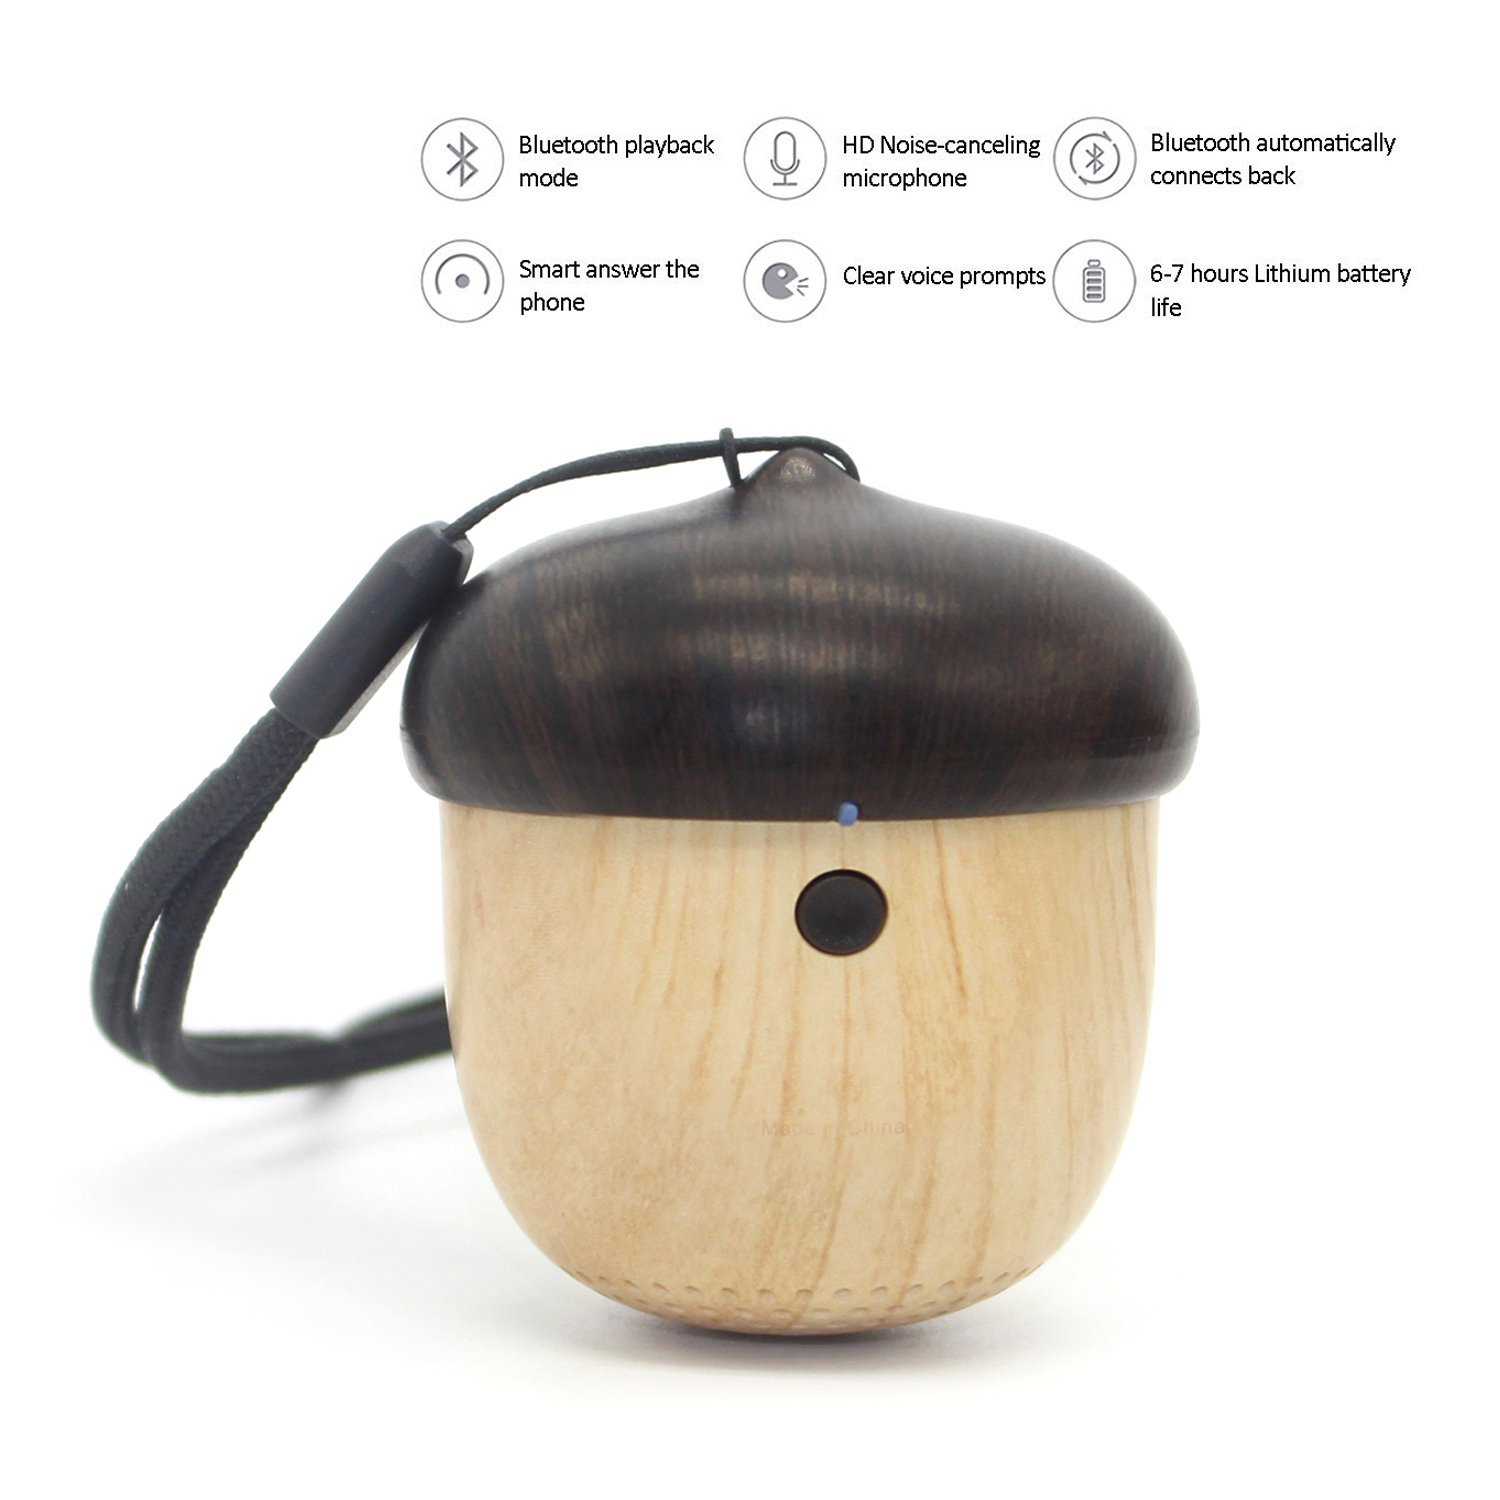 Natural "NUT" Bluetooth Speaker, portable, rechargeable, your music pal